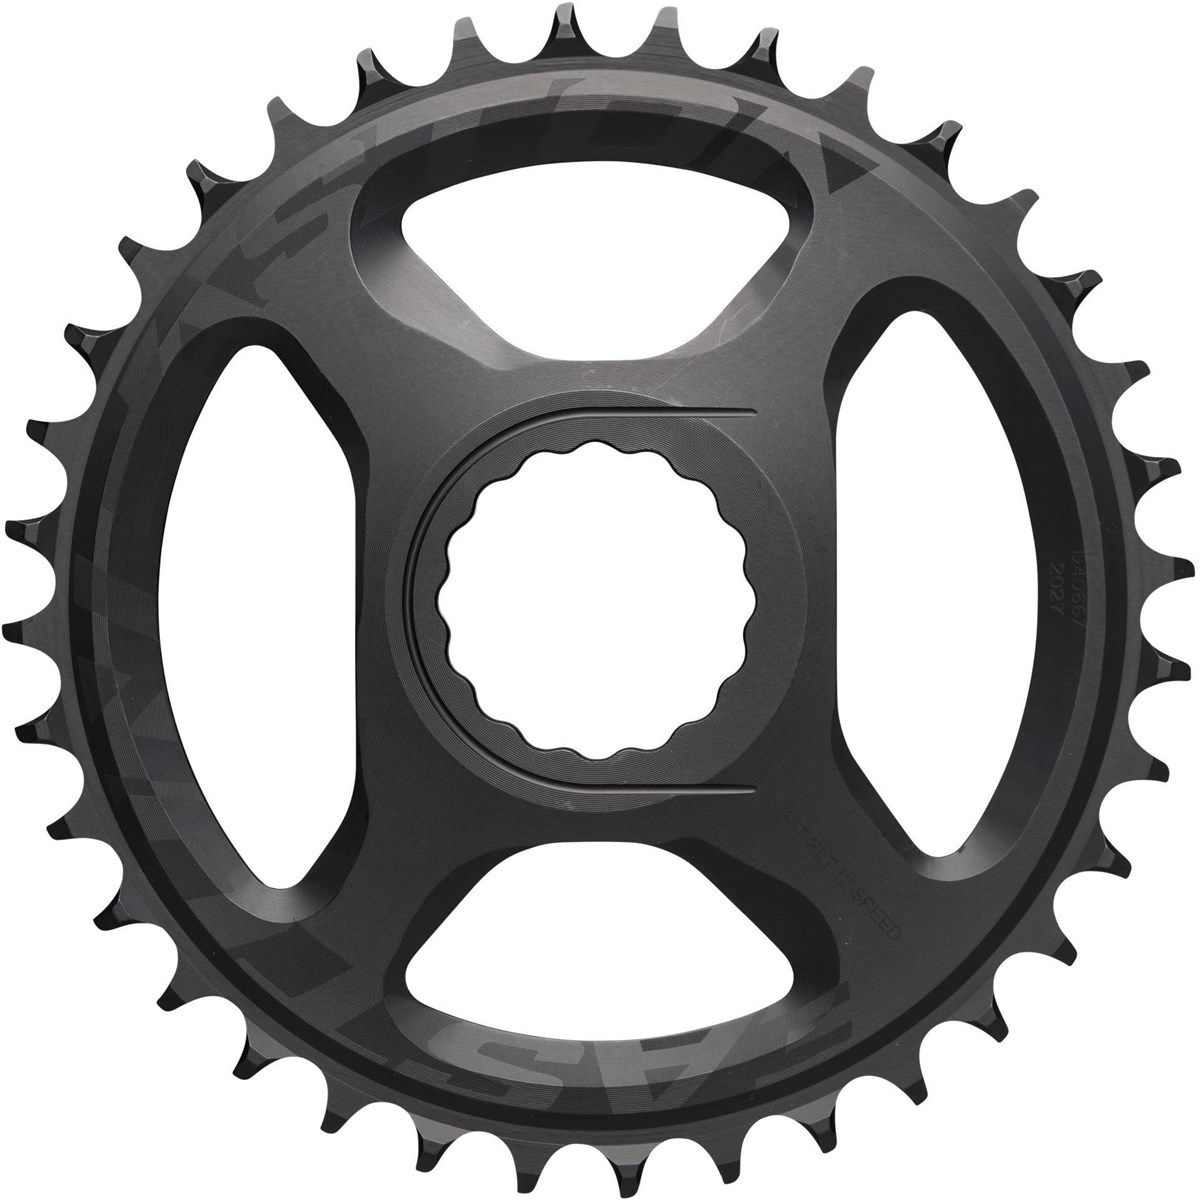 Easton Direct Mount Flattop 12 Speed Chainring product image